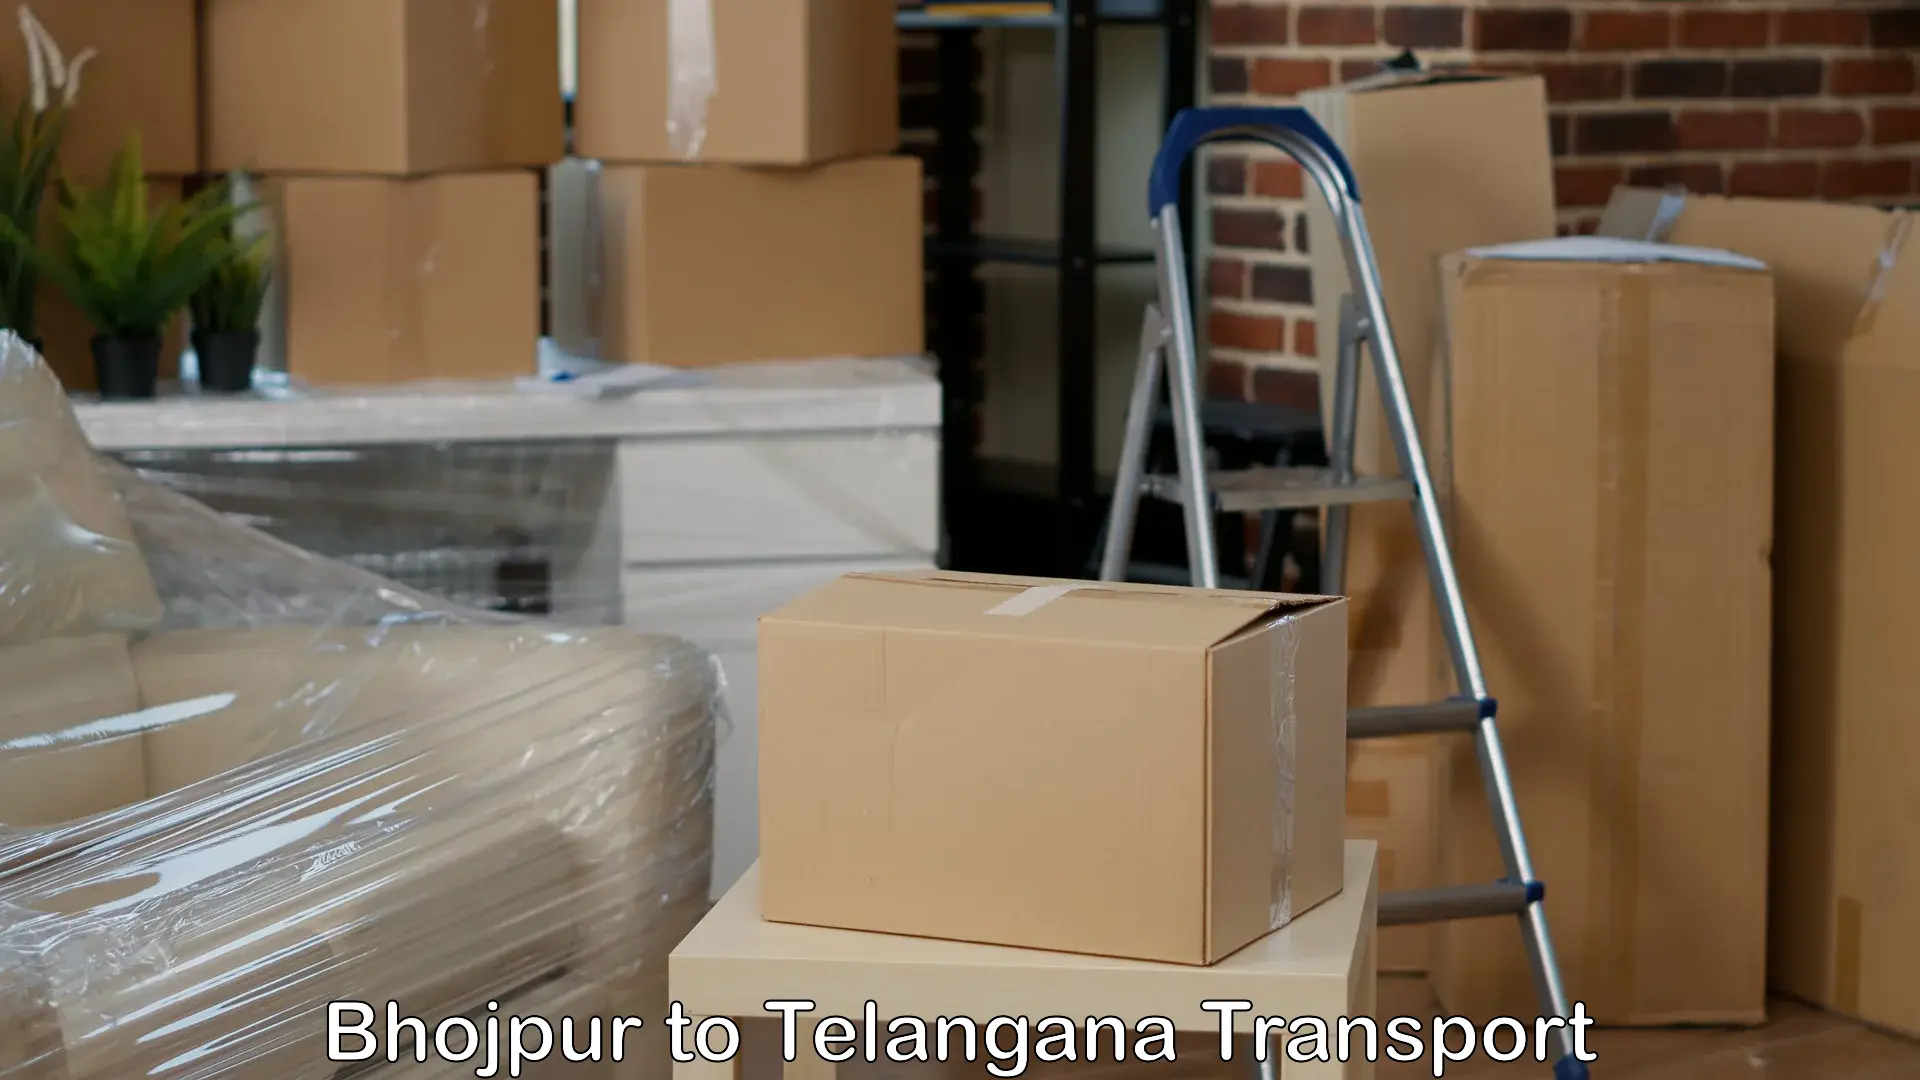 Truck transport companies in India Bhojpur to Asifabad